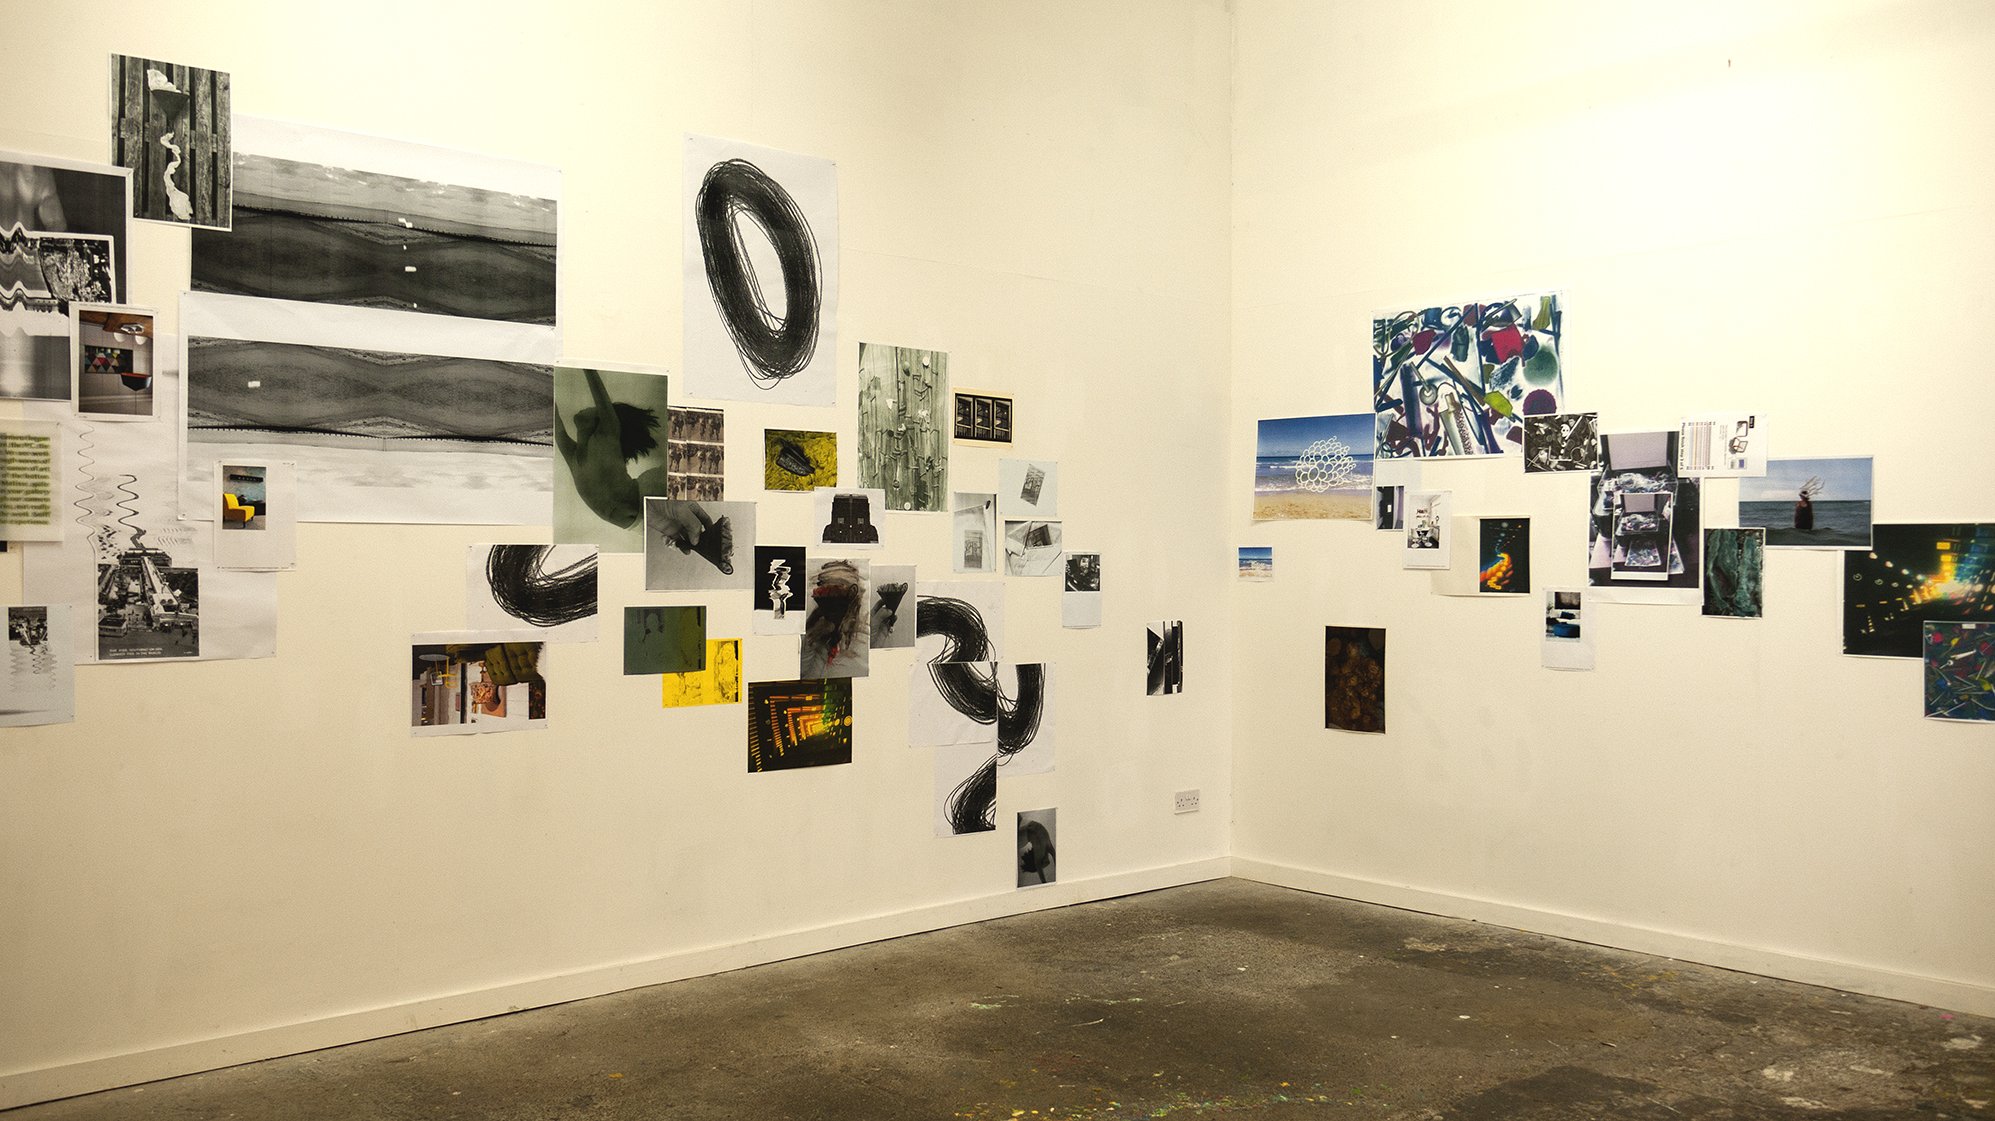  Installation view of TOMA show at Limbo, Margate 